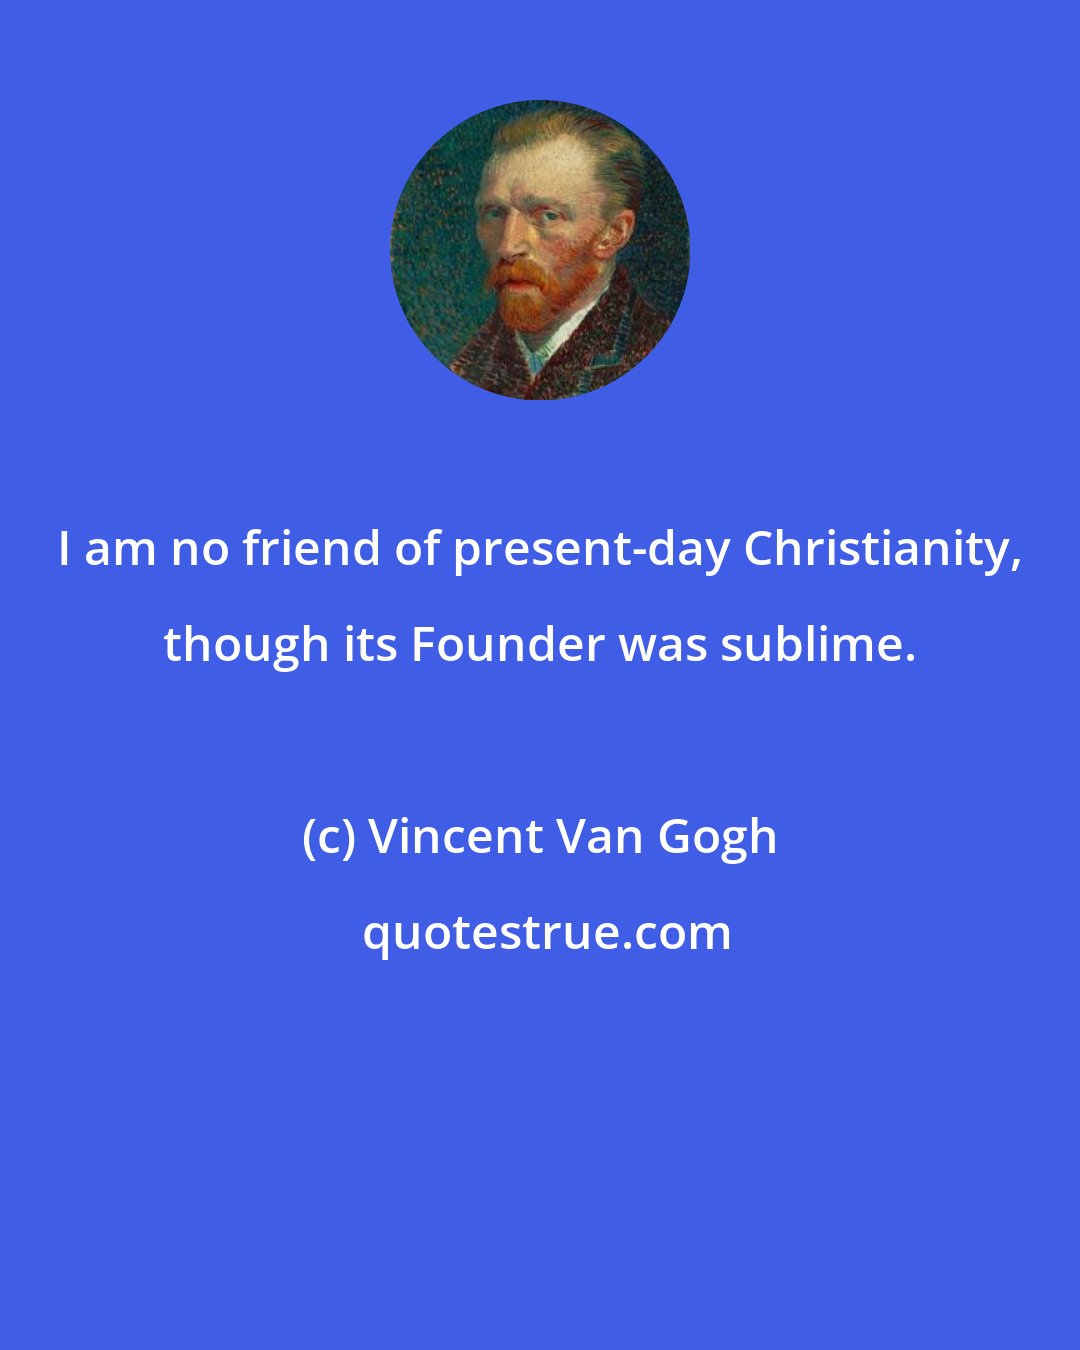 Vincent Van Gogh: I am no friend of present-day Christianity, though its Founder was sublime.